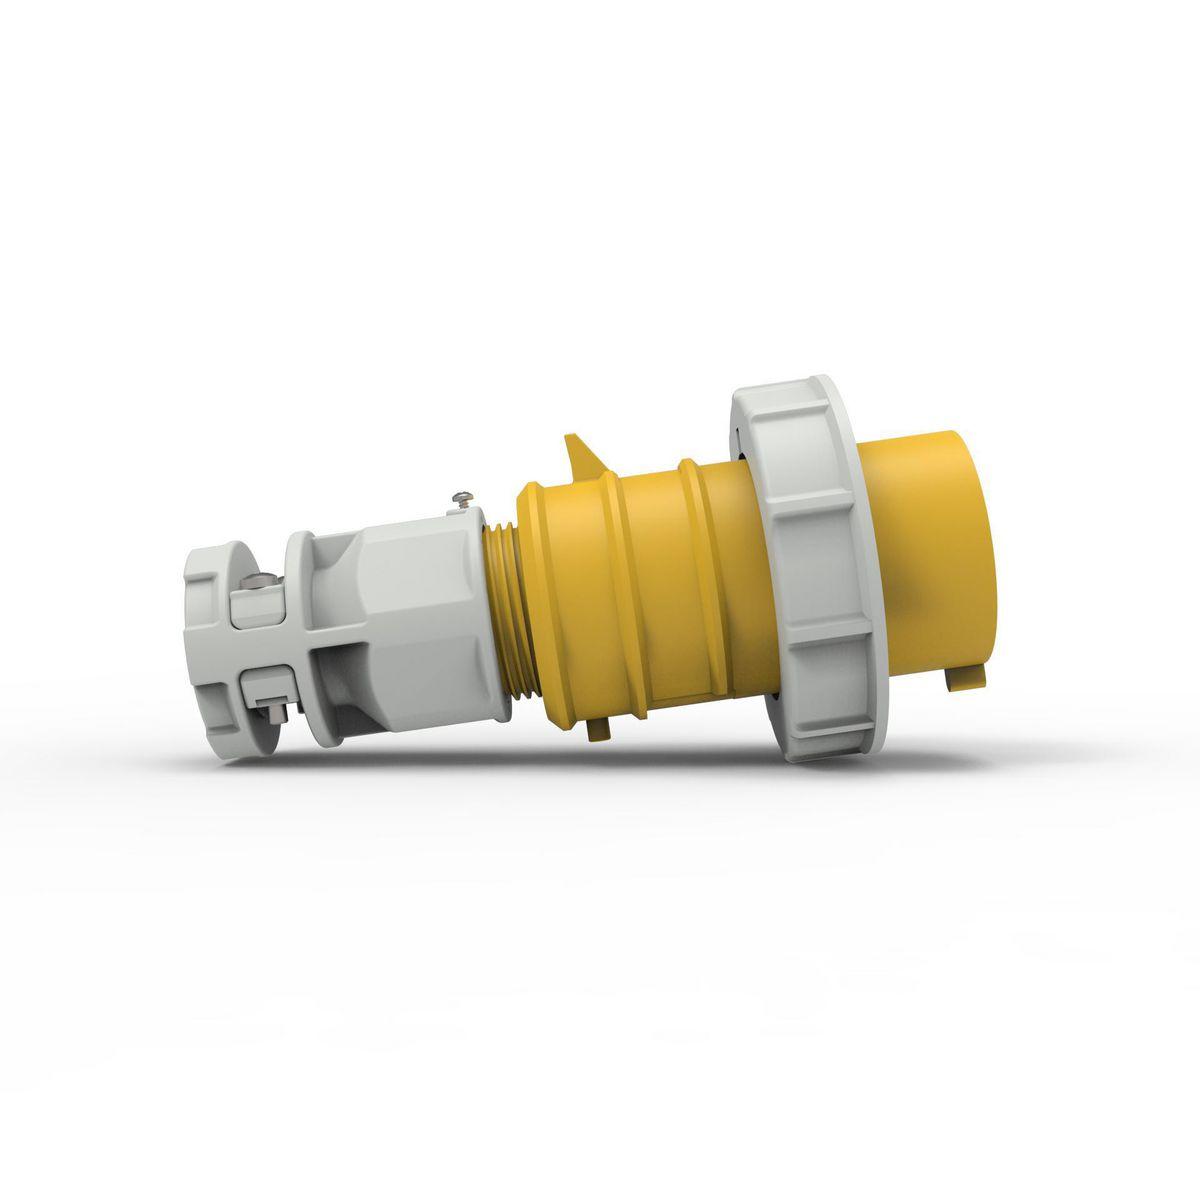 Hubbell C330P4WA Heavy Duty Products, IEC Pin and Sleeve Devices, Hubbell-PRO, Male, Plug, 30 A 125 VAC, 2-POLE 3-WIRE, Yellow, Watertight  ; IP67 environmental ratings ; Impact and corrosion resistant insulated non-metallic housing ; Sequential contact engagement to prev